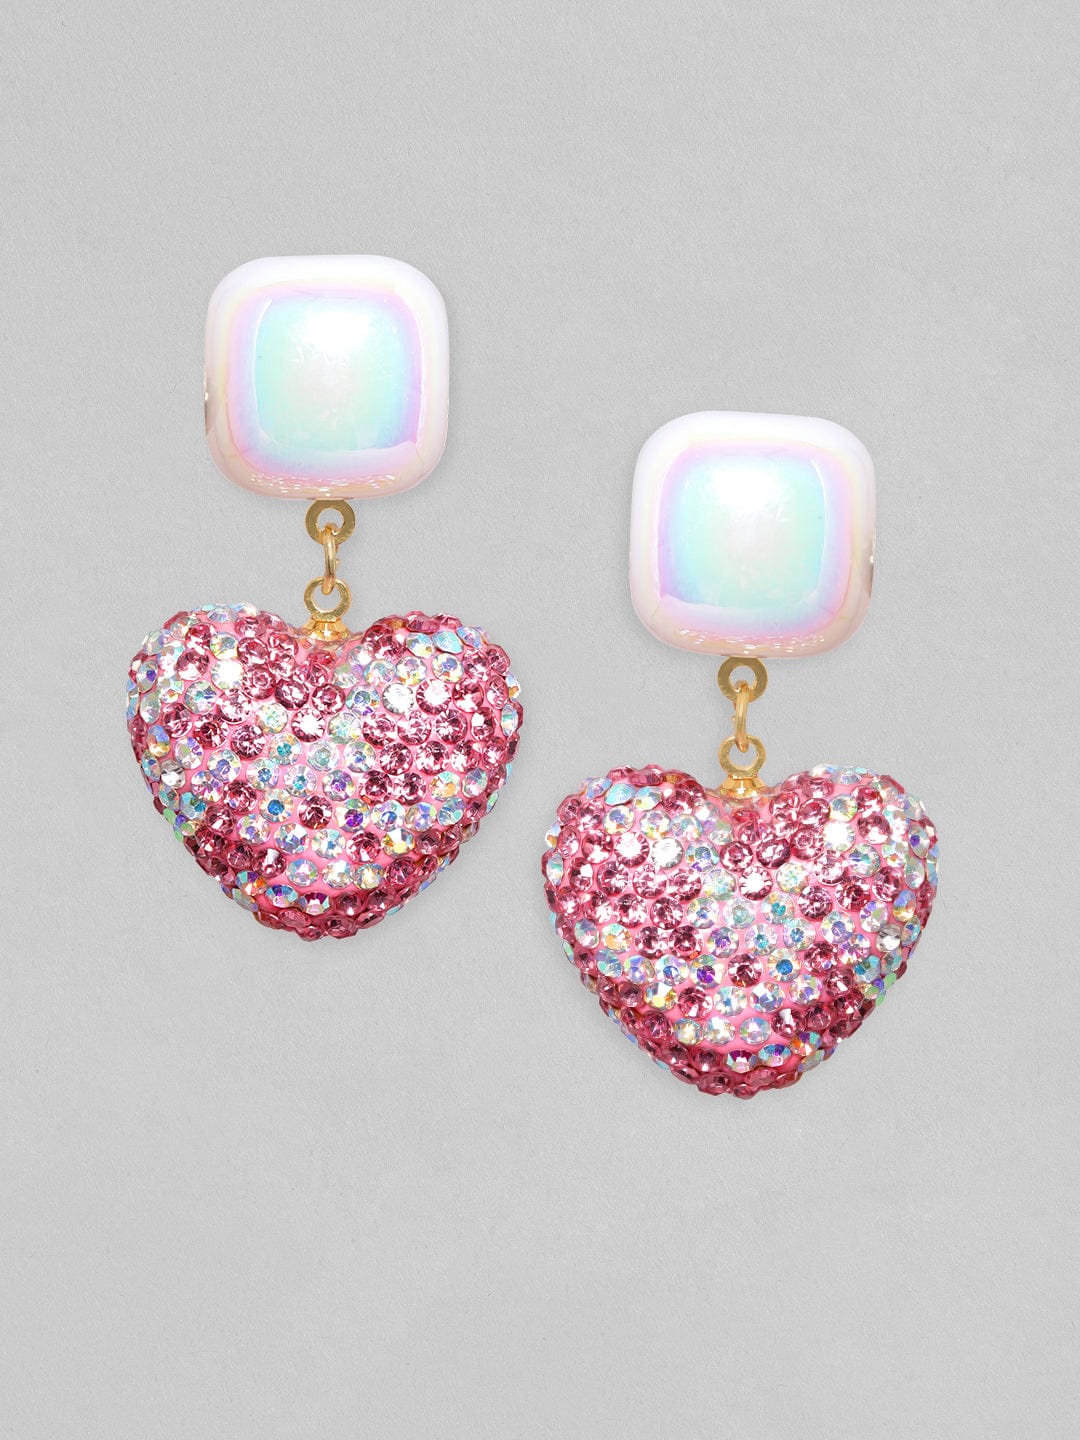 Rubans Voguish Pearl &amp; Pink Crystal Pave Studded Heart Motif Dangle Earring Earrings